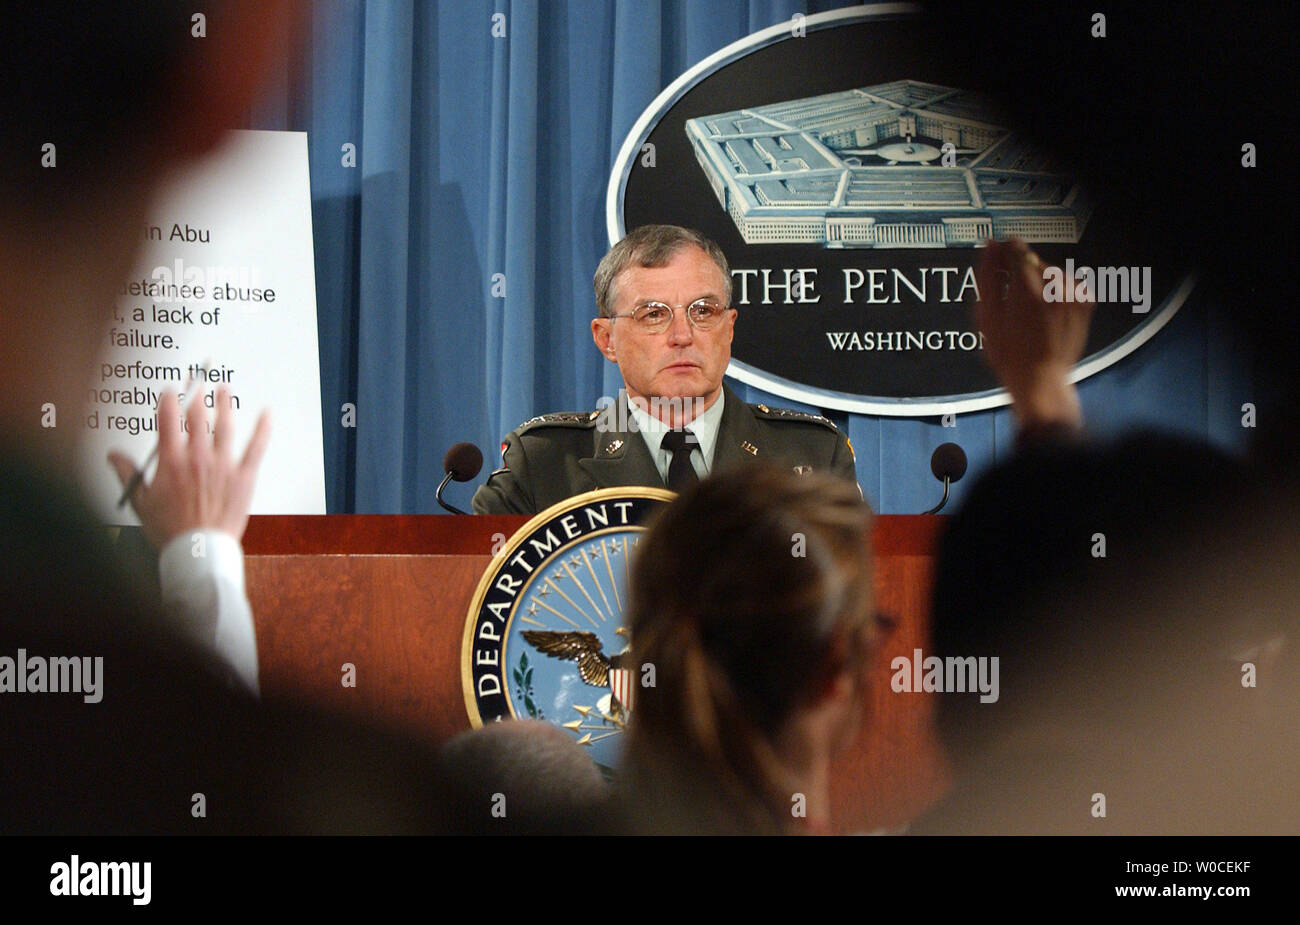 Gen. Paul Kern answers questions from reporters about abuse at the Abu Ghraib prison in Iraq during a news conference at the Pentagon on Aug. 25, 2004, in Arlington, Va. The Defense Department investigation found that less than 50 individuals were to blame for the abuses, but that officers above them in the chain of command made errors that led to the conditions that resulted in the abuses.  (UPI Photo/Roger L. Wollenberg) Stock Photo